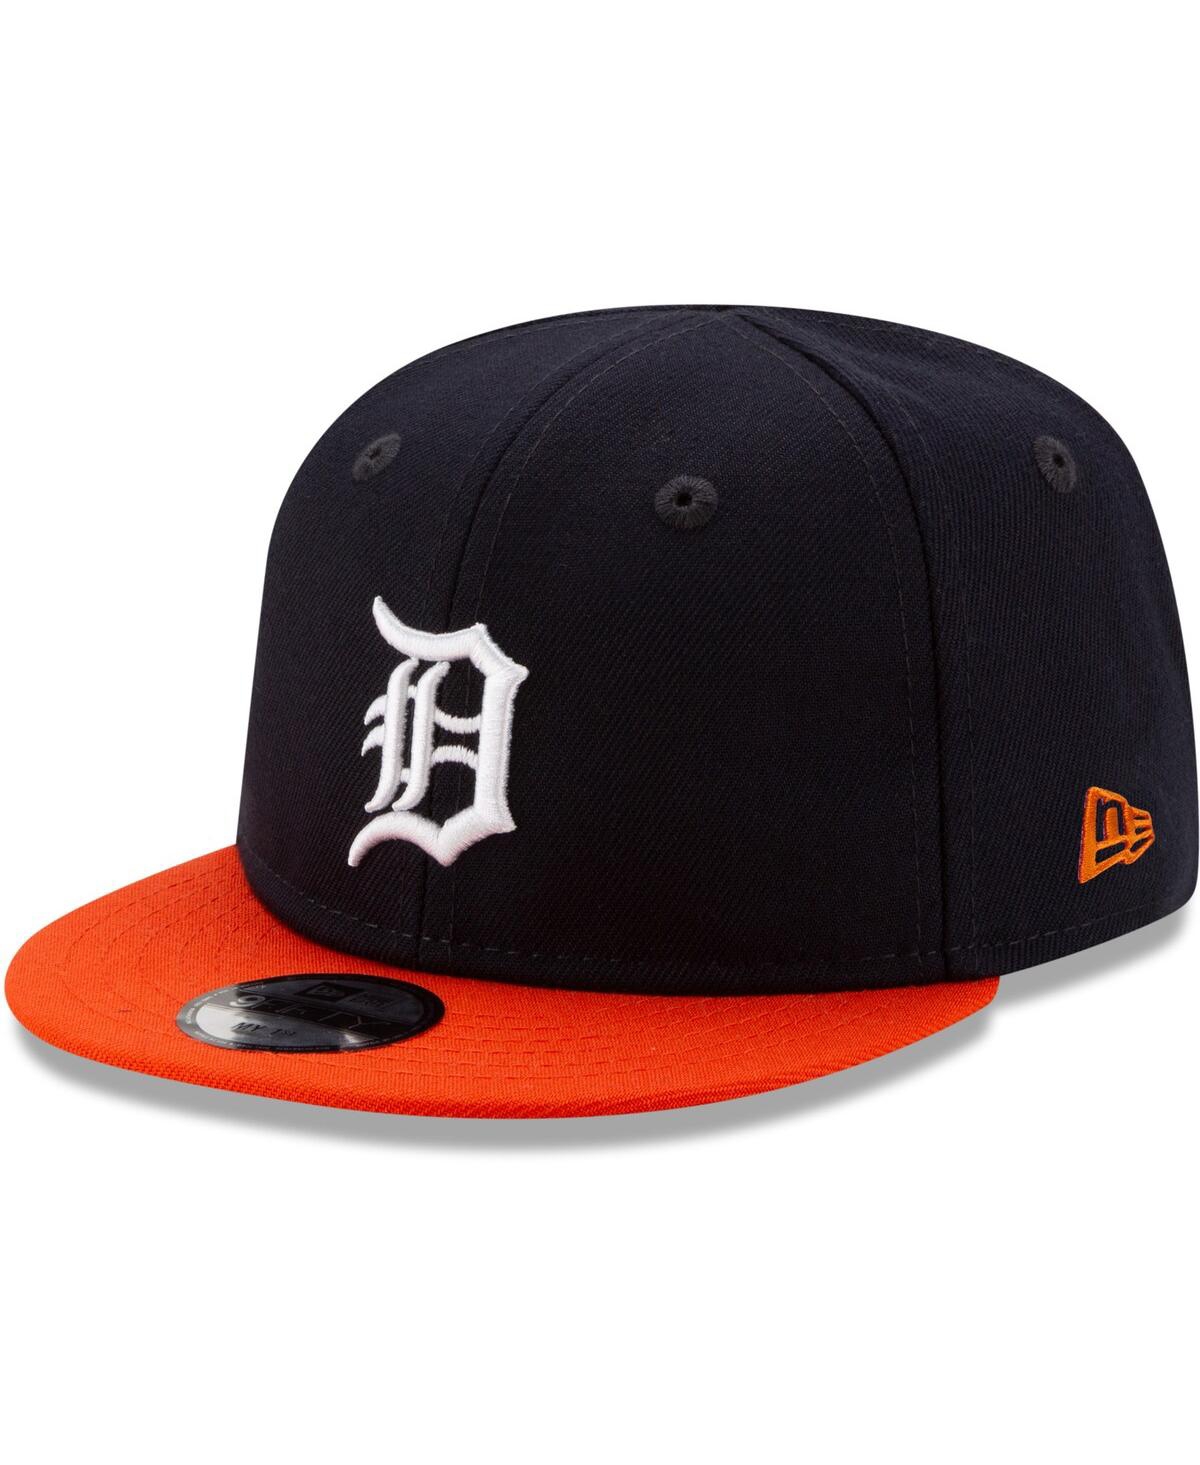 New Era Babies' Infant Unisex  Navy Detroit Tigers My First 9fifty Hat